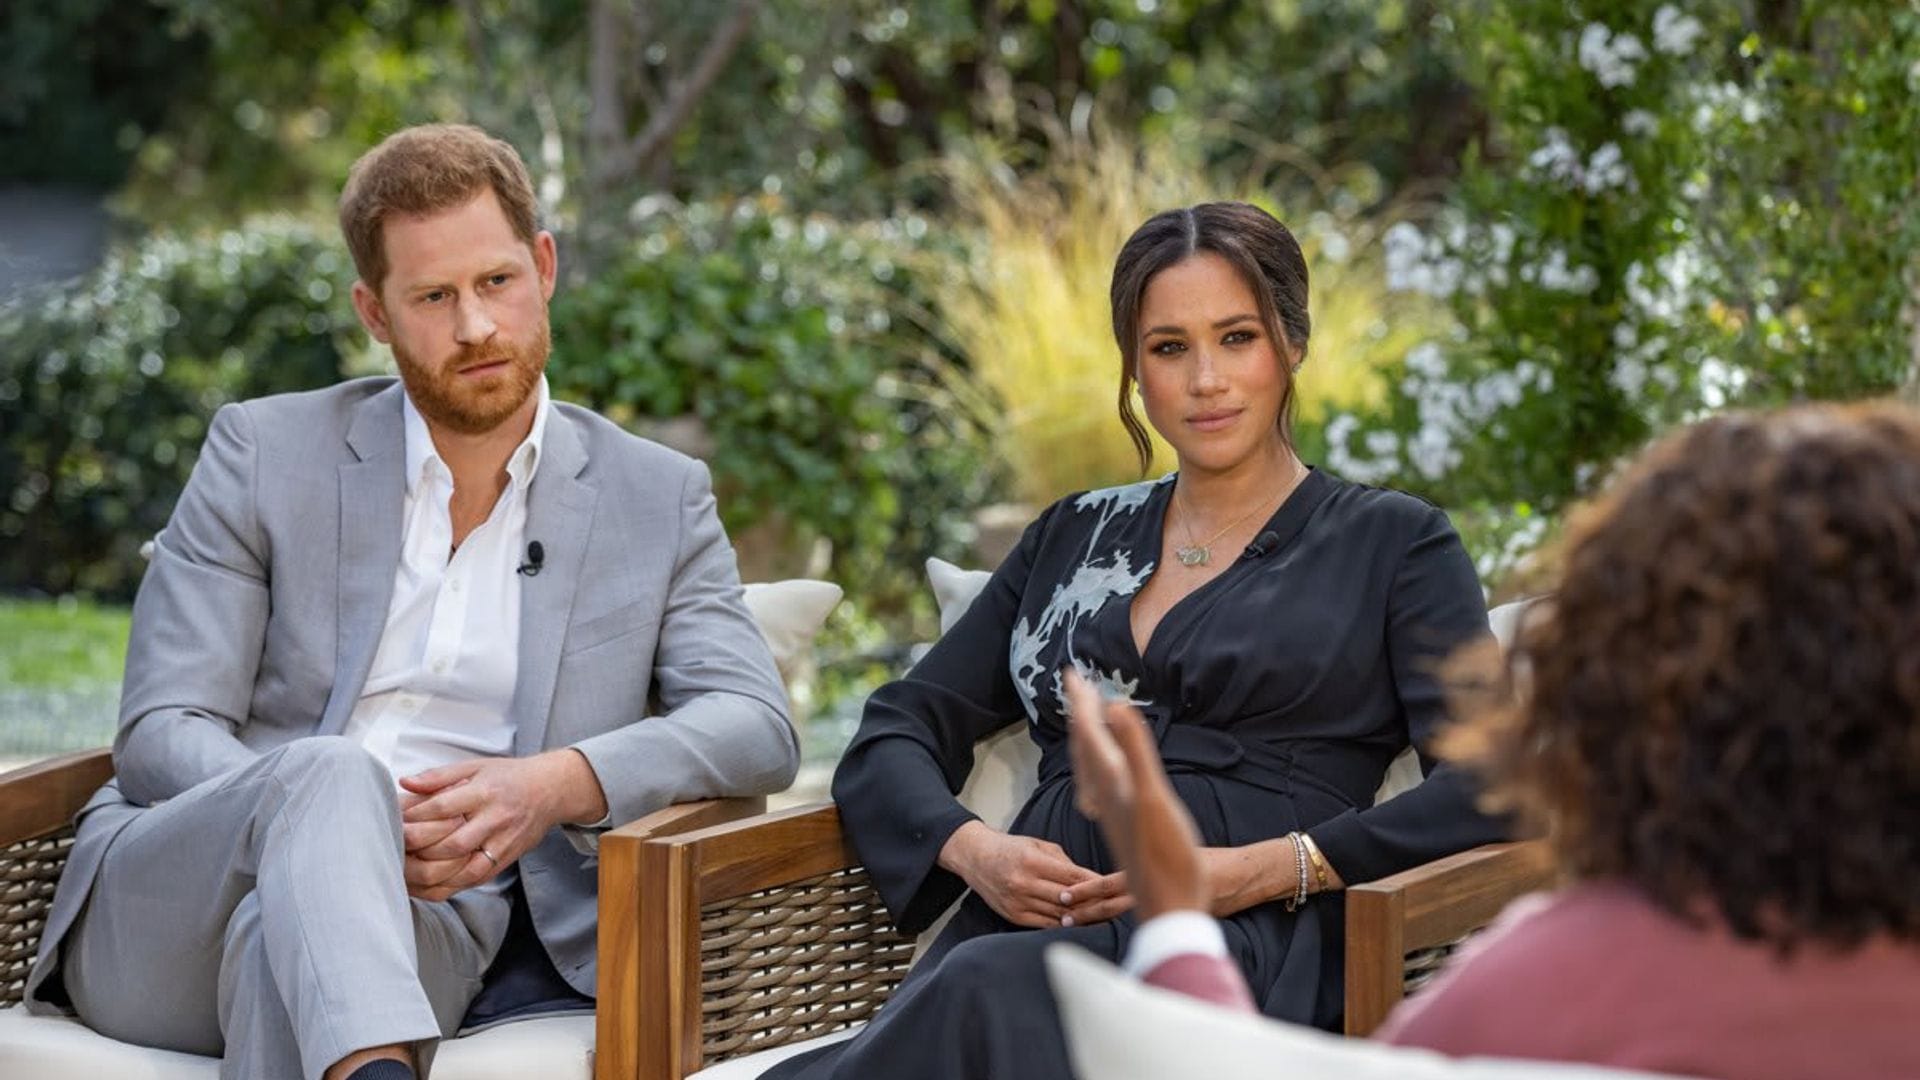 Oprah's interview with Meghan Markle and Prince Harry scores Emmy nomination